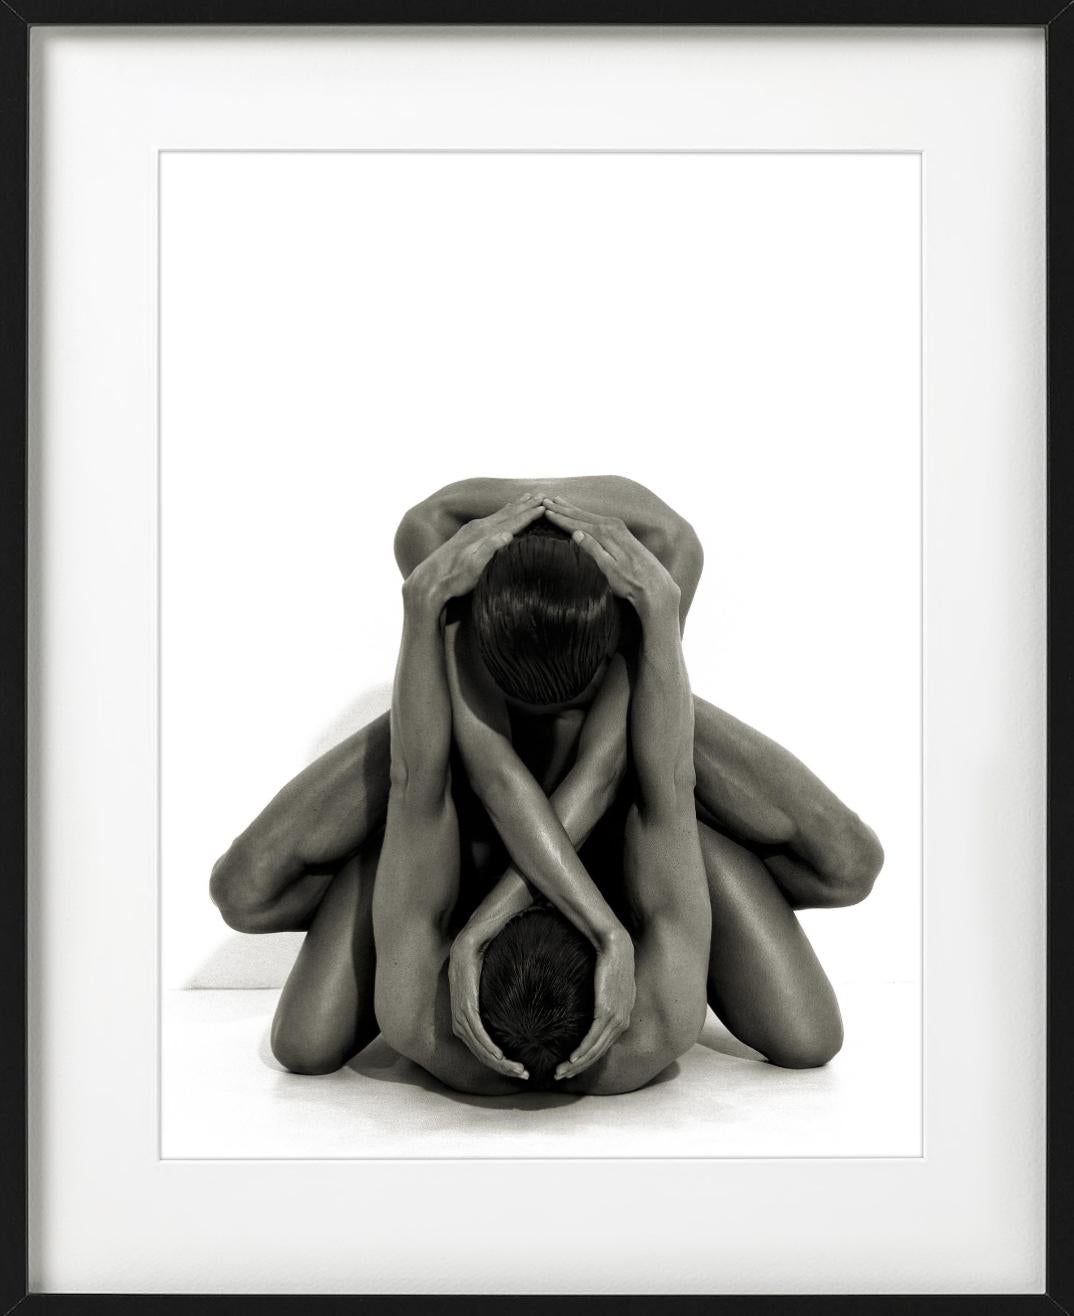 Yvonne & Tom, nude photograph of man and woman intertwined in embrace - Contemporary Photograph by Andreas H. Bitesnich